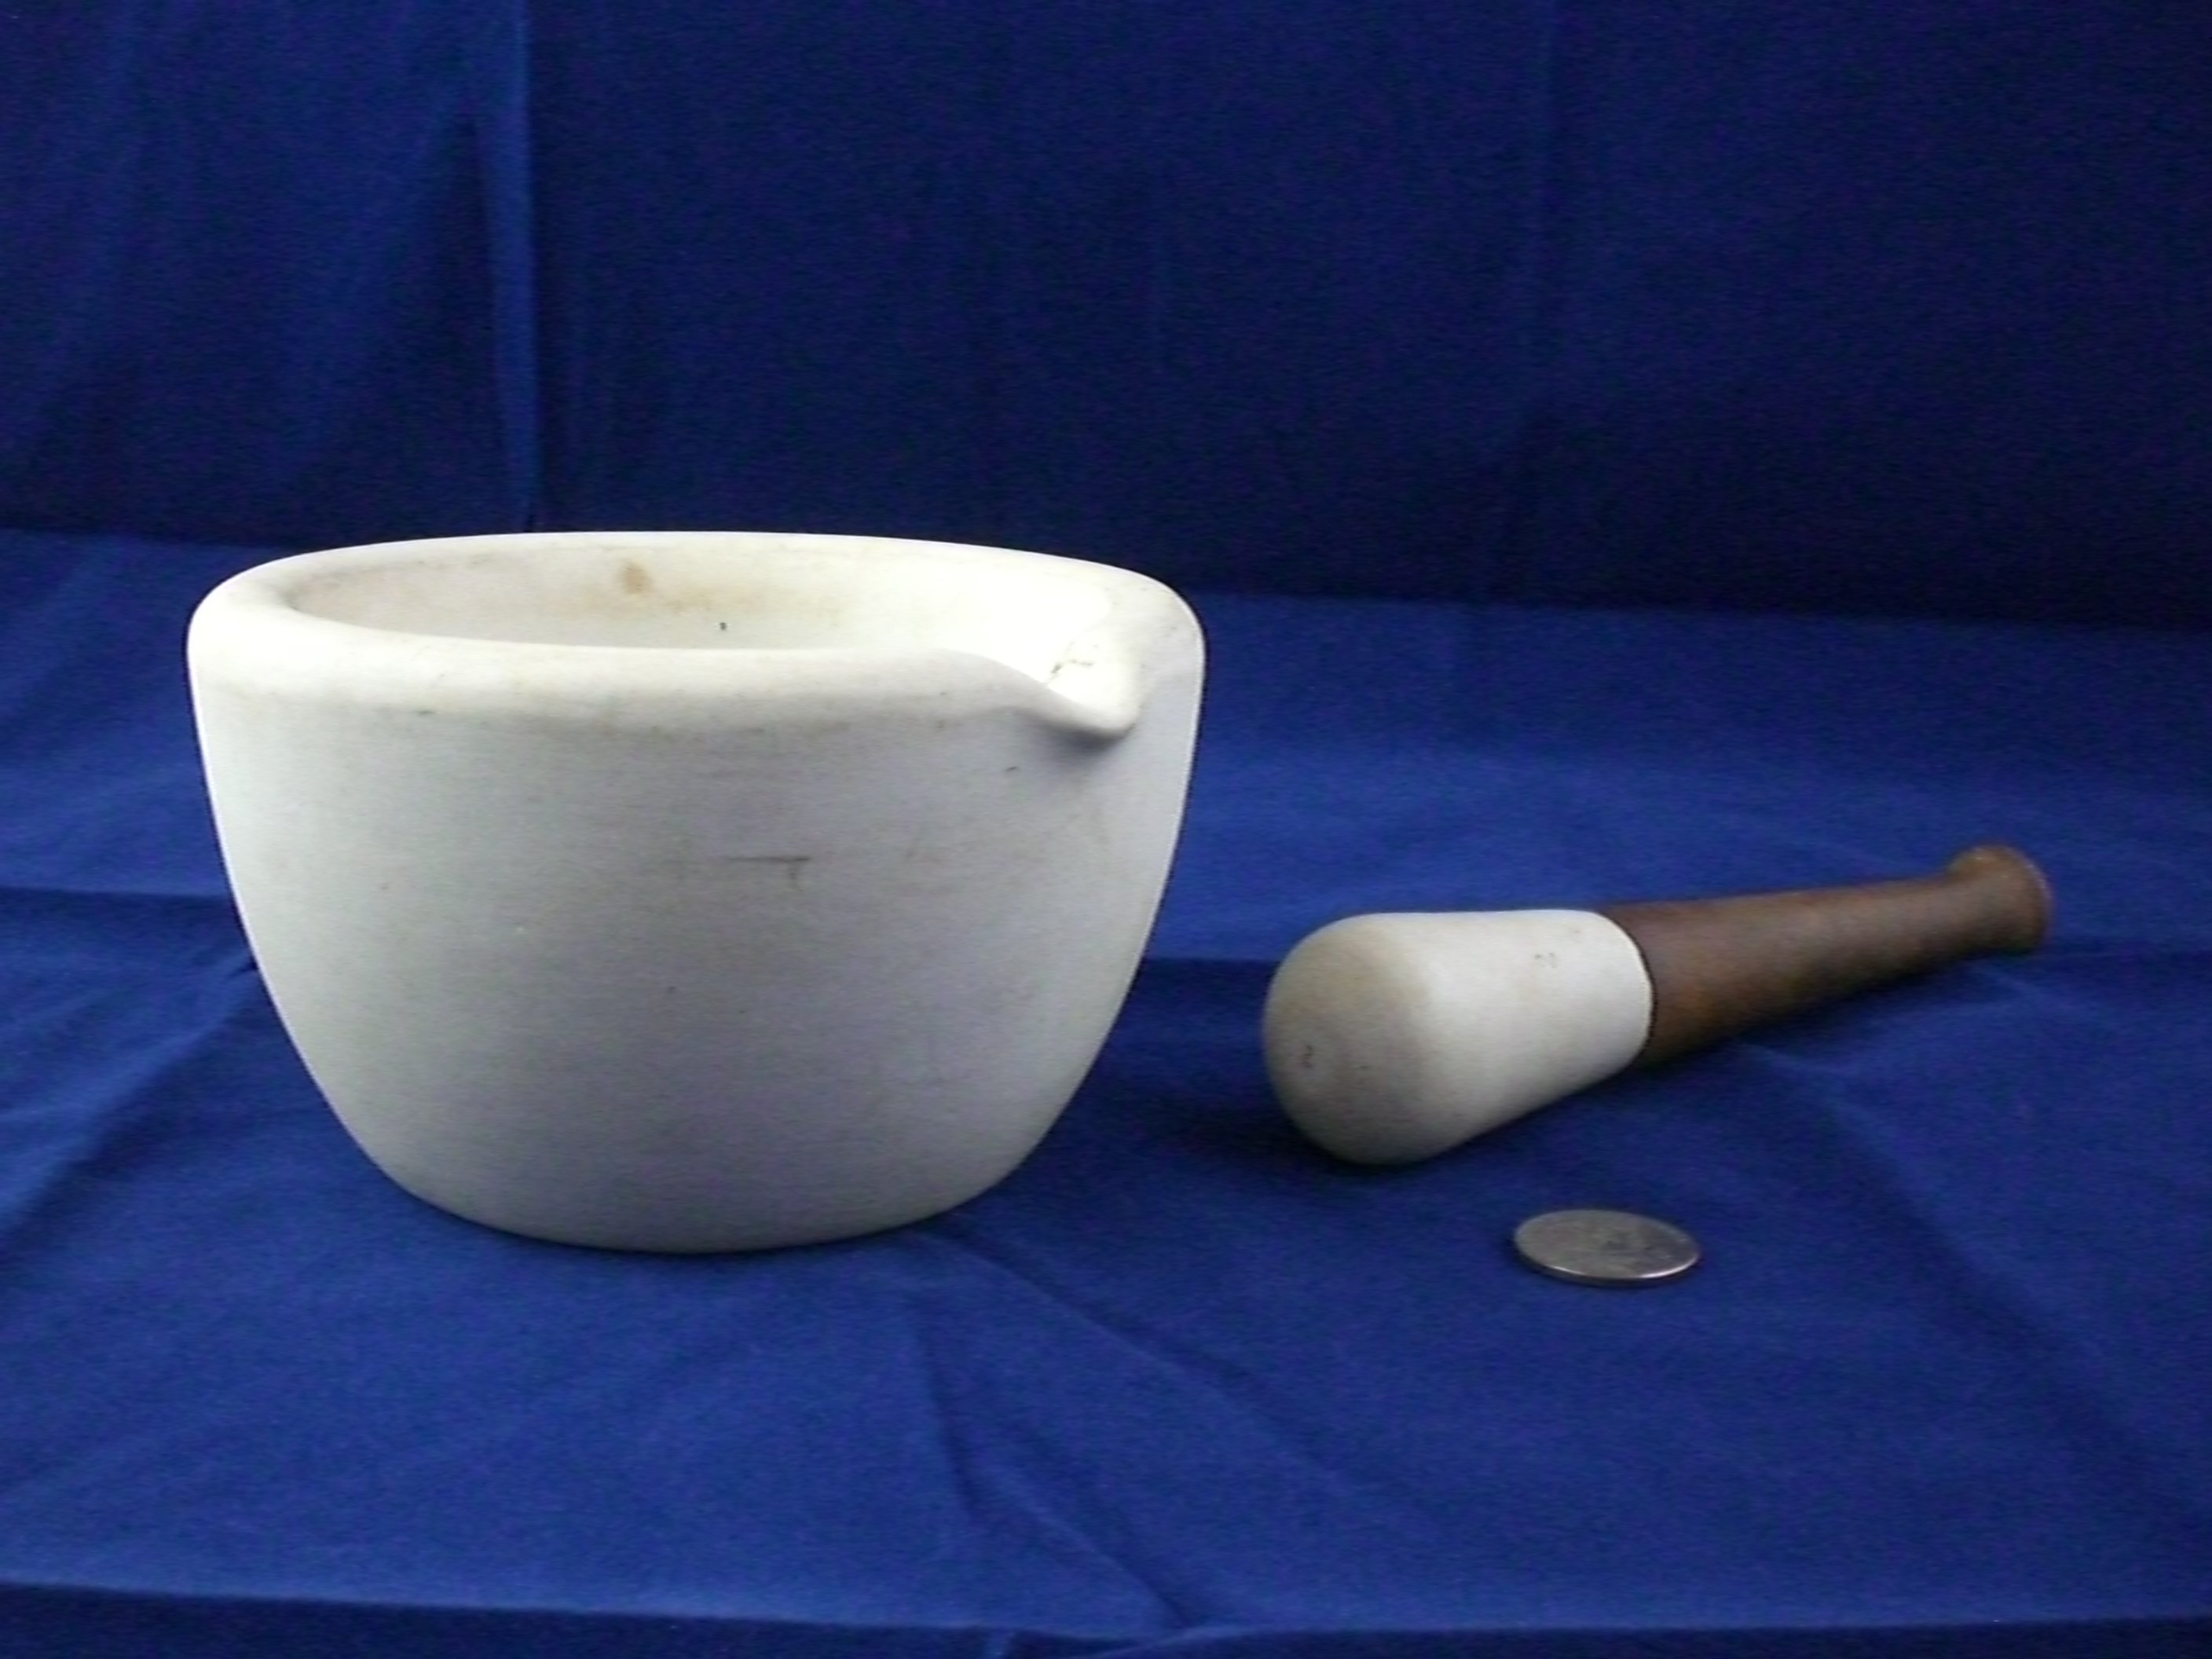 Mortar and pestle from Stabler Leadbeater apothecary